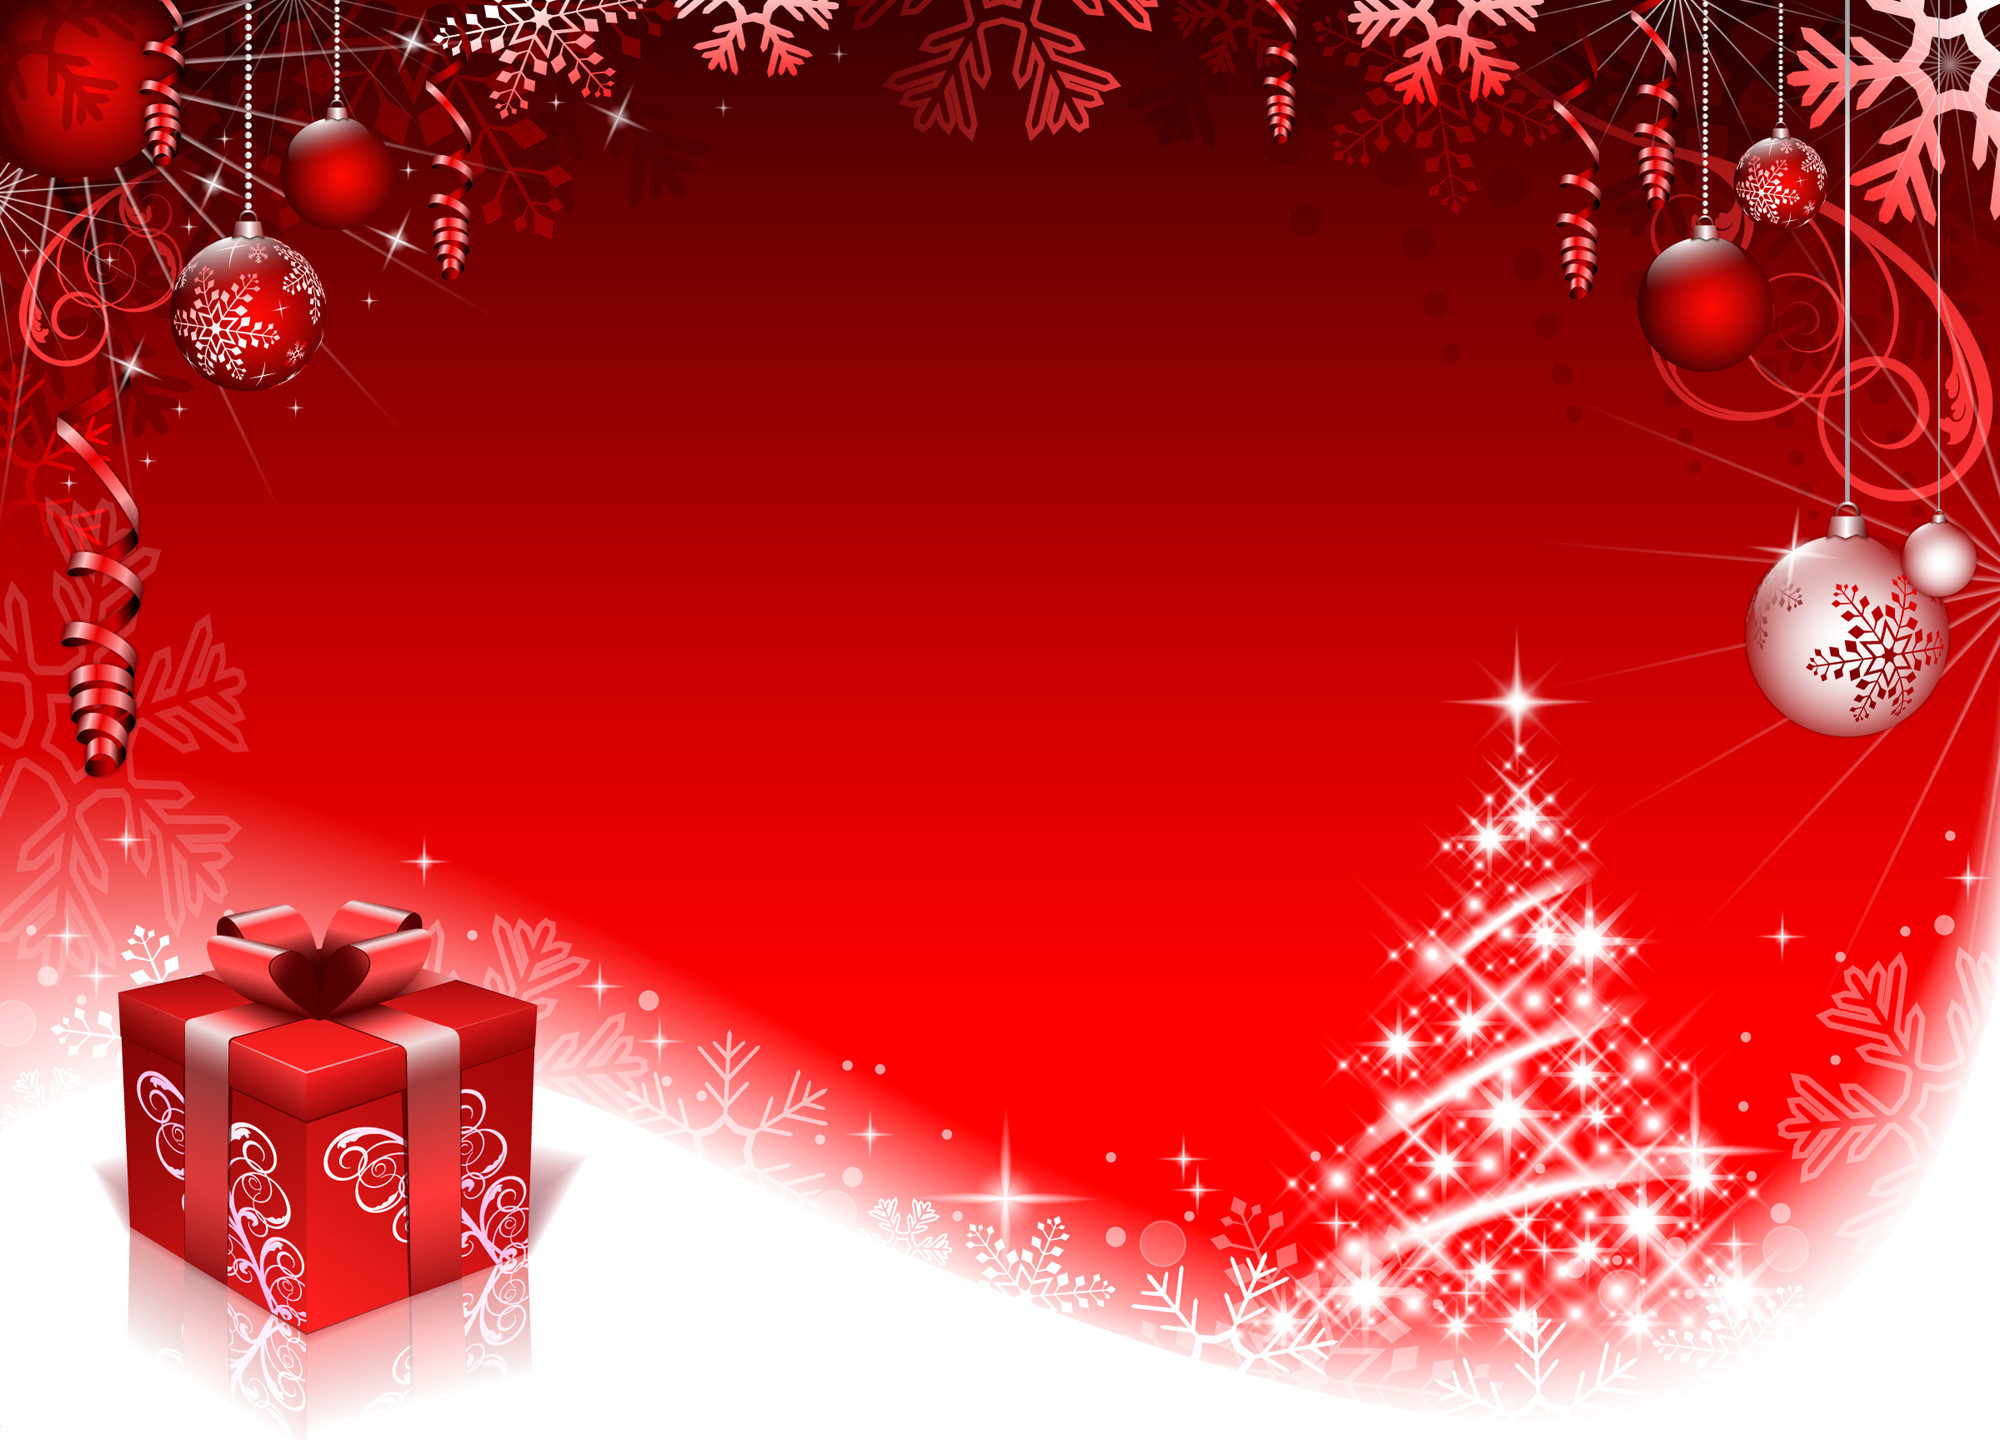 2000x1440 Free Red Christmas Backgrounds for Photoshop